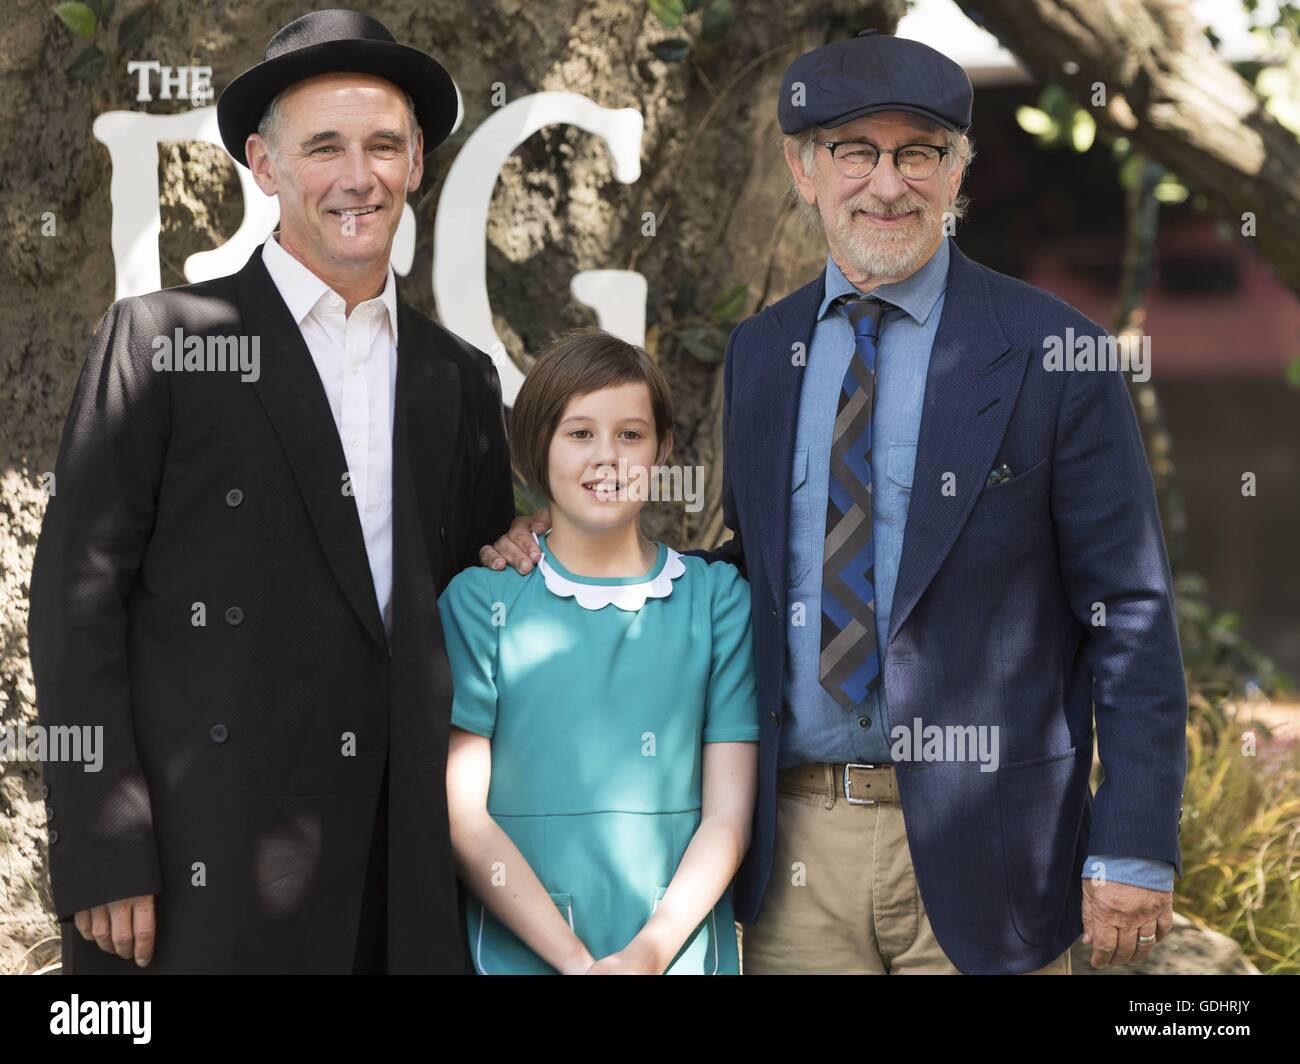 London, UK. 17th July, 2016. Mark Rylance, Ruby Barnhill, and Steven Spielberg, The BFG film premiere at Leicester Square in London. 17/07/2016 | usage worldwide/picture alliance Credit:  dpa/Alamy Live News Stock Photo